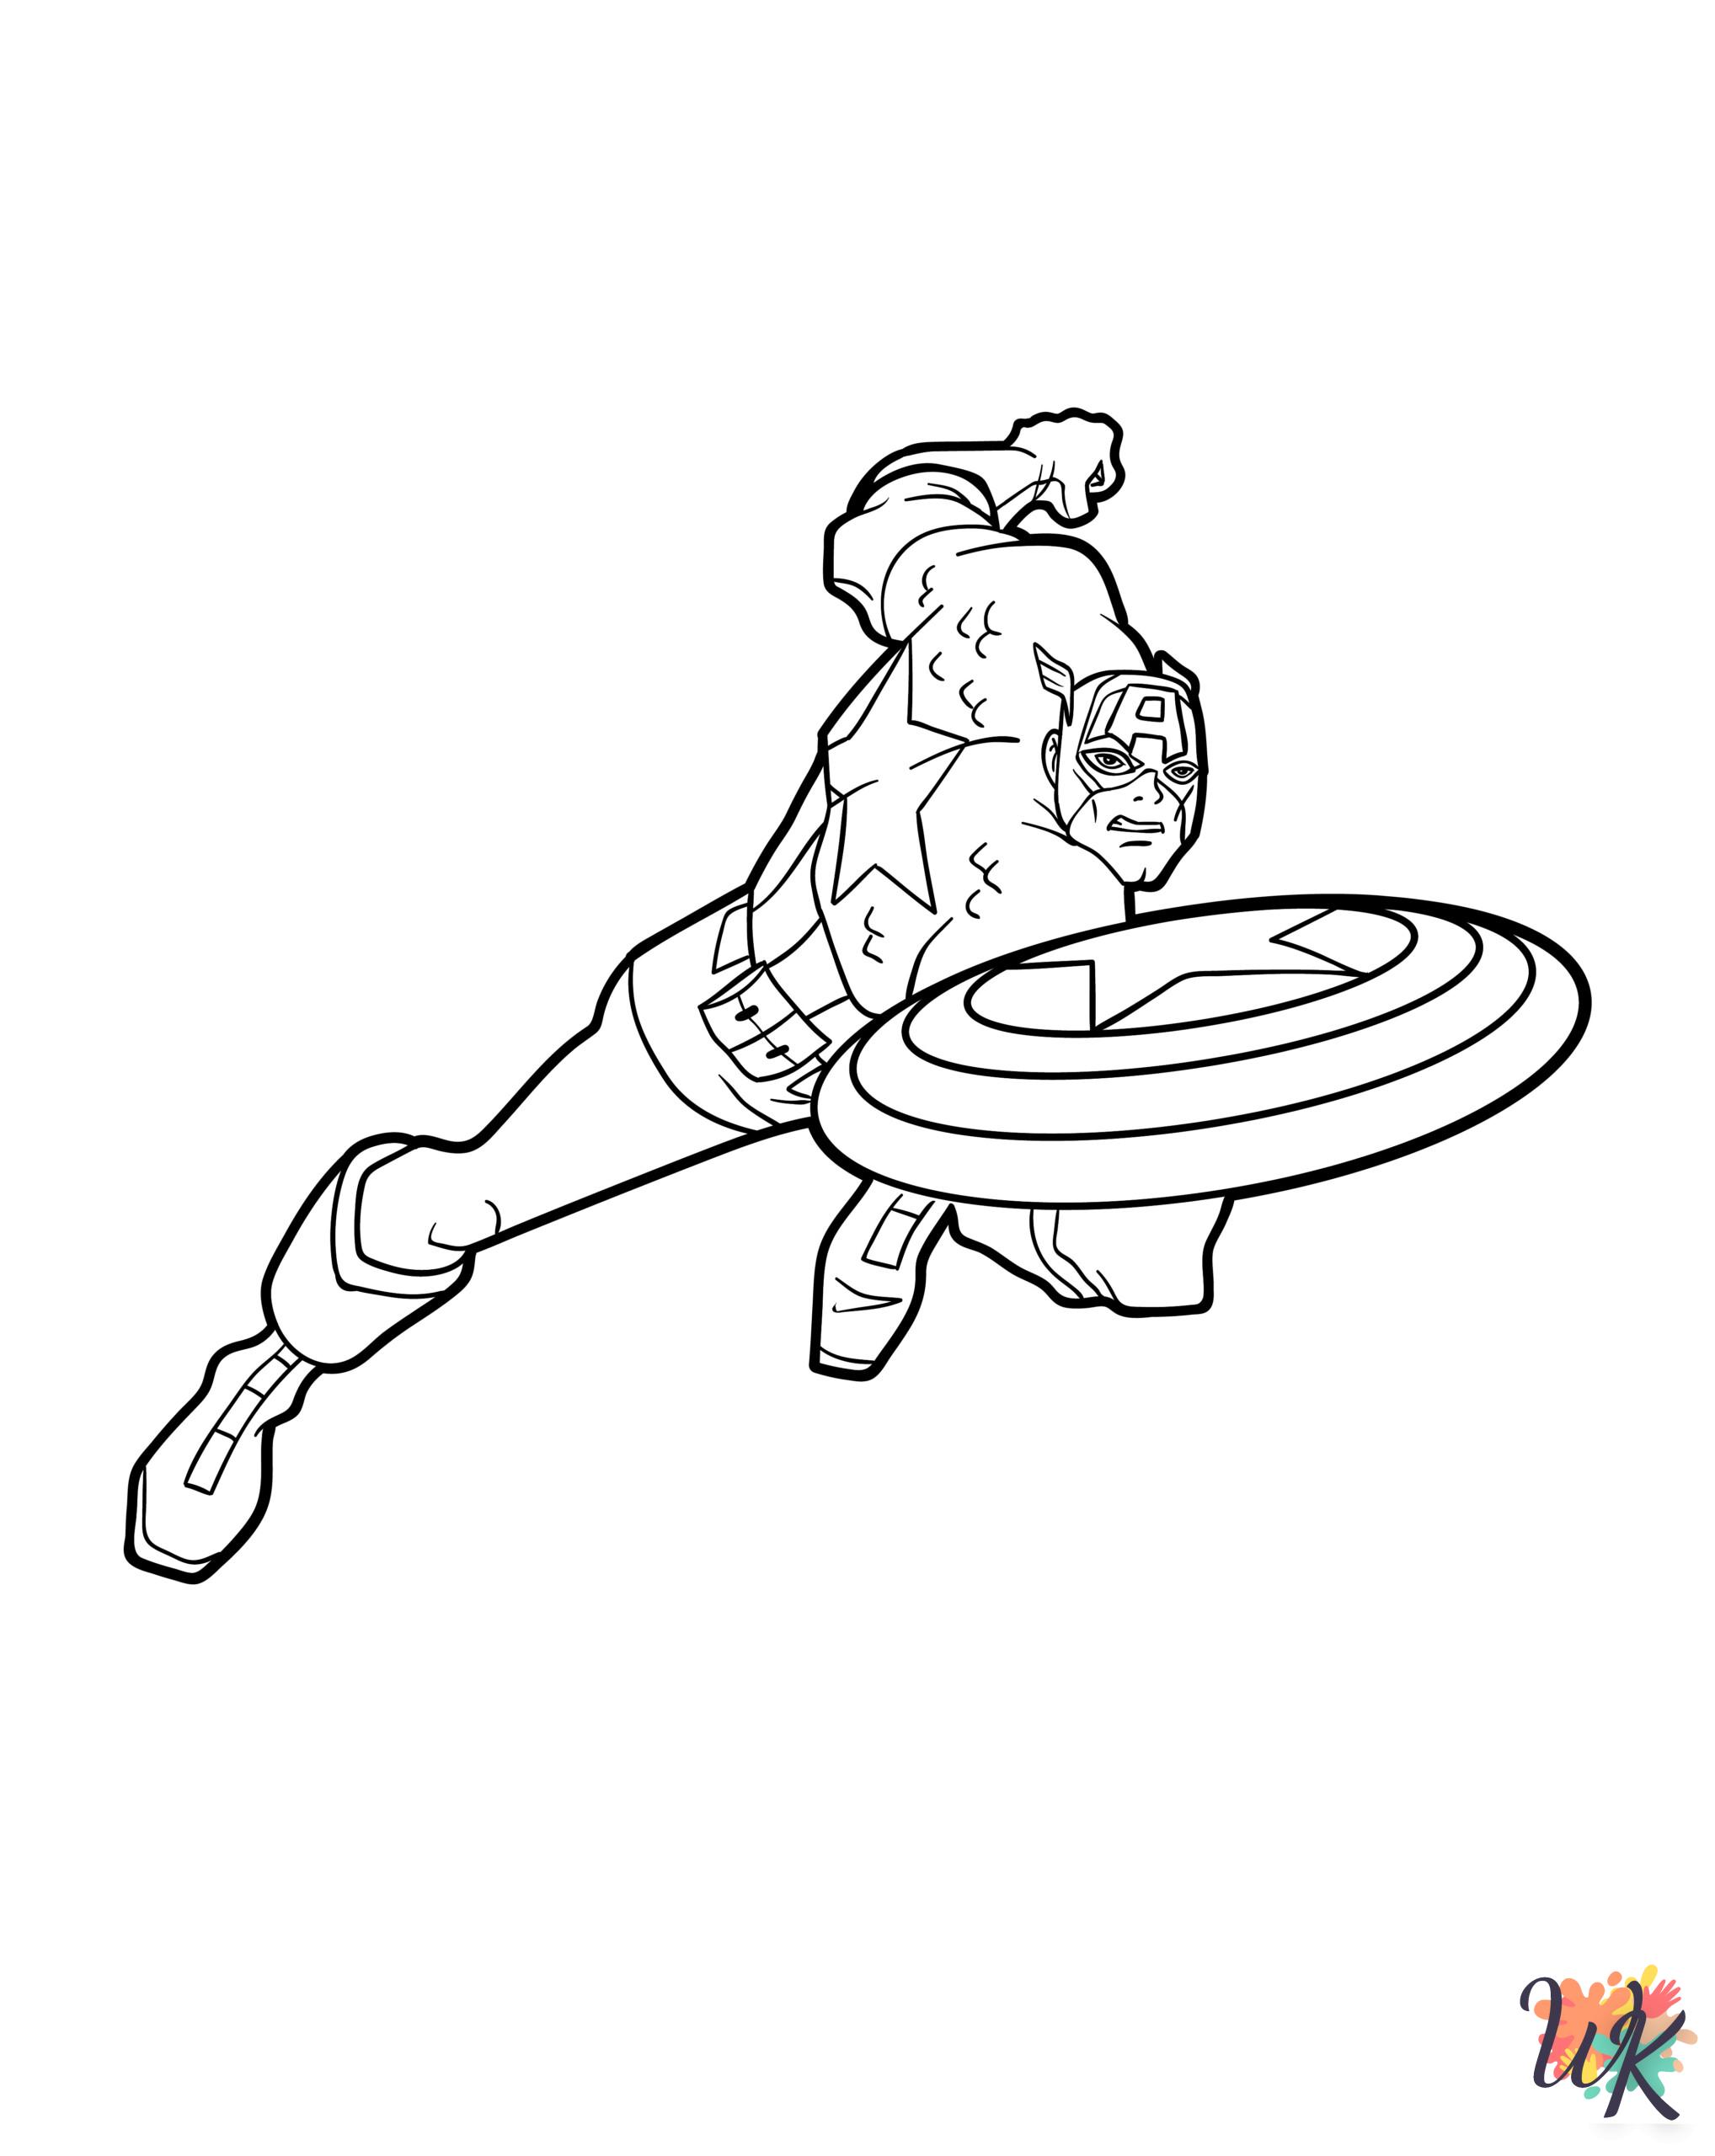 Captain America adult coloring pages